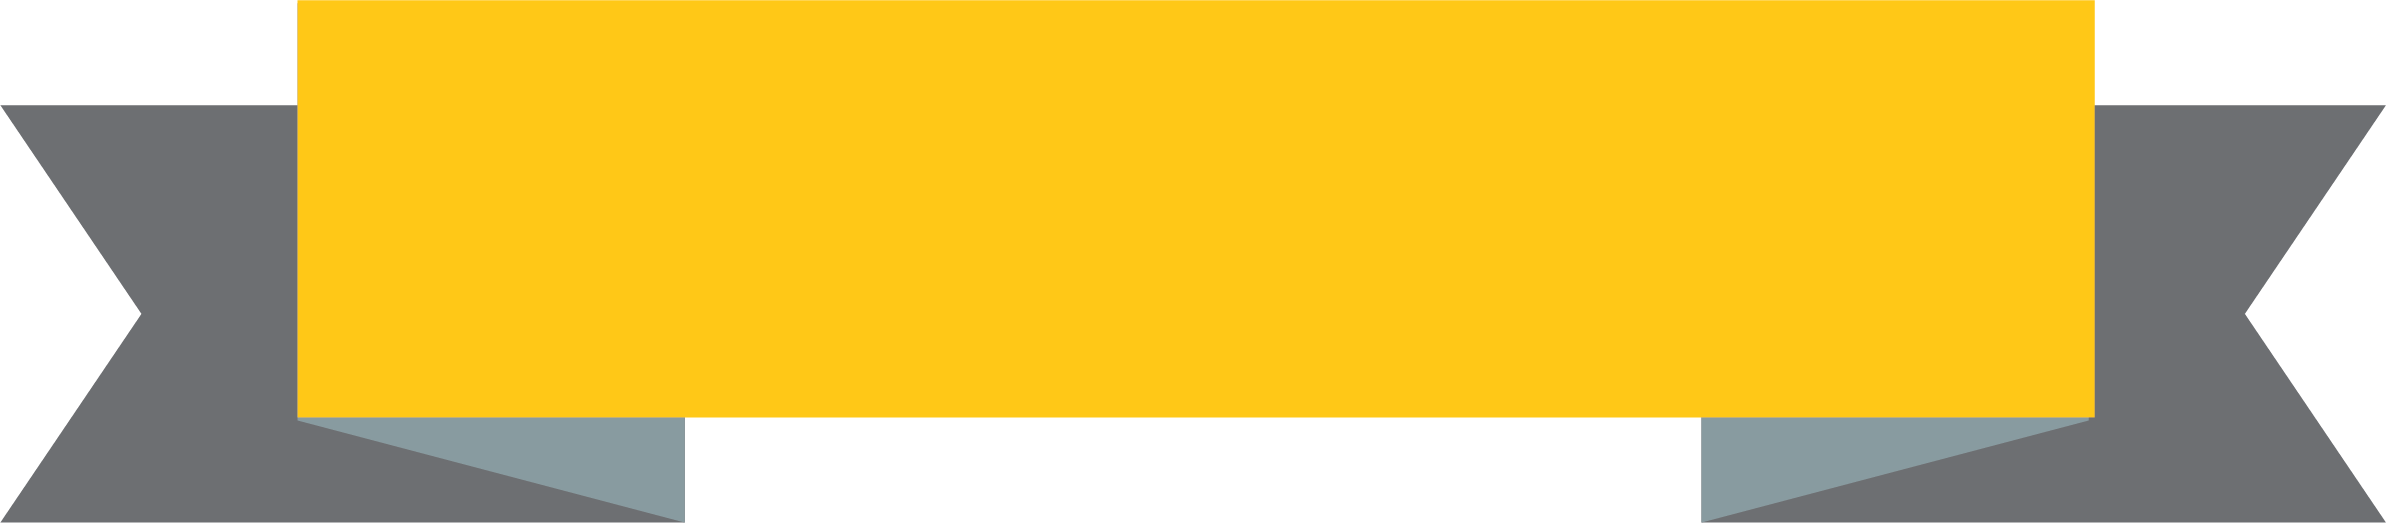 Yellow Ribbon PNG Image with Transparent Background